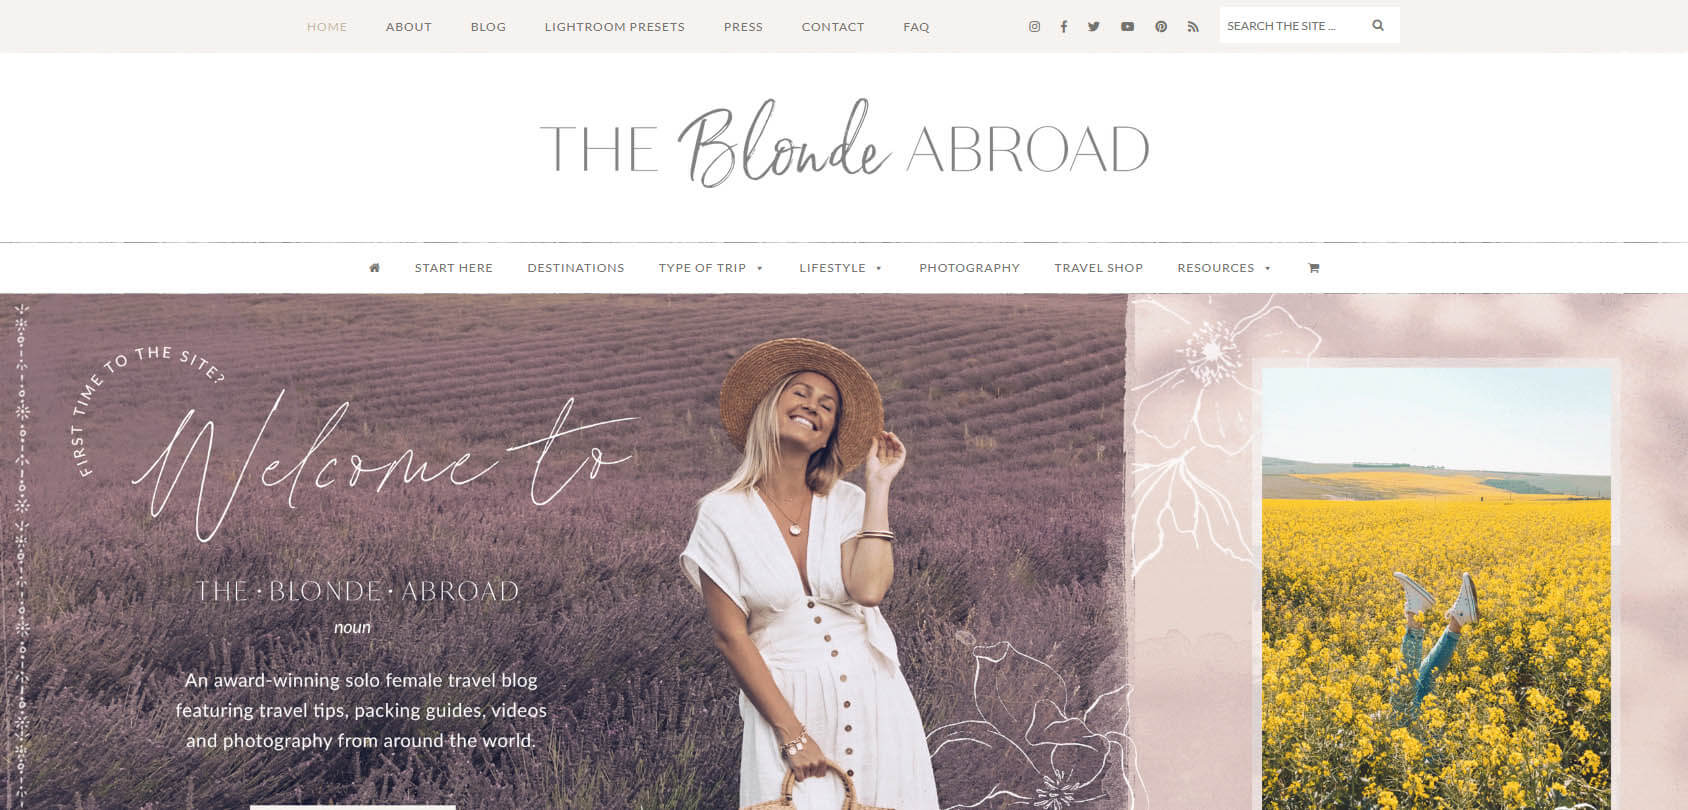 The Blonde Abroad Homepage